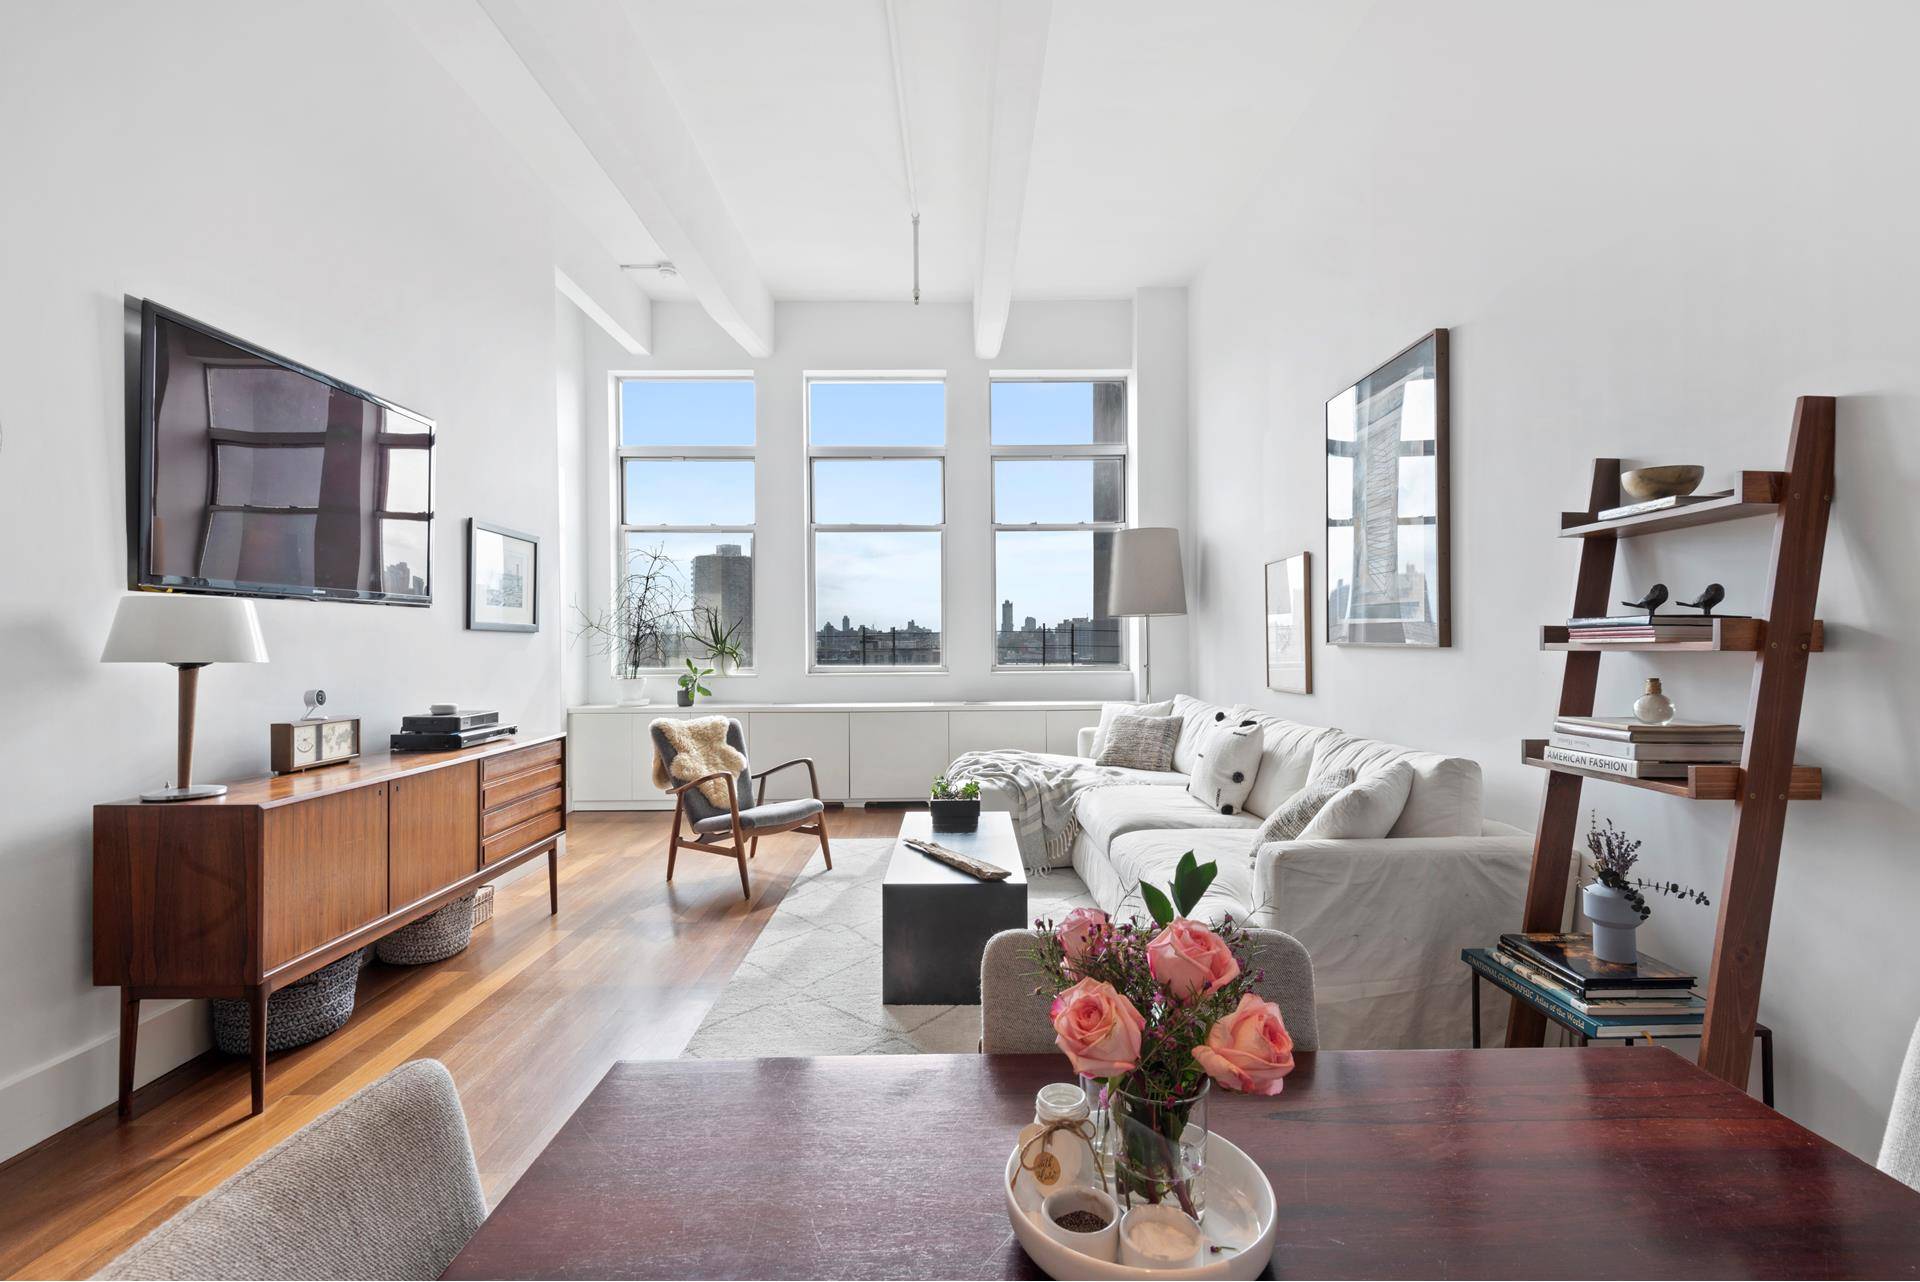 This beautiful loft in one of the most iconic buildings in Williamsburg features 2 bedrooms and 2 bathrooms facing South with beautiful views of Downtown Brooklyn and the Manhatthan Bridge.